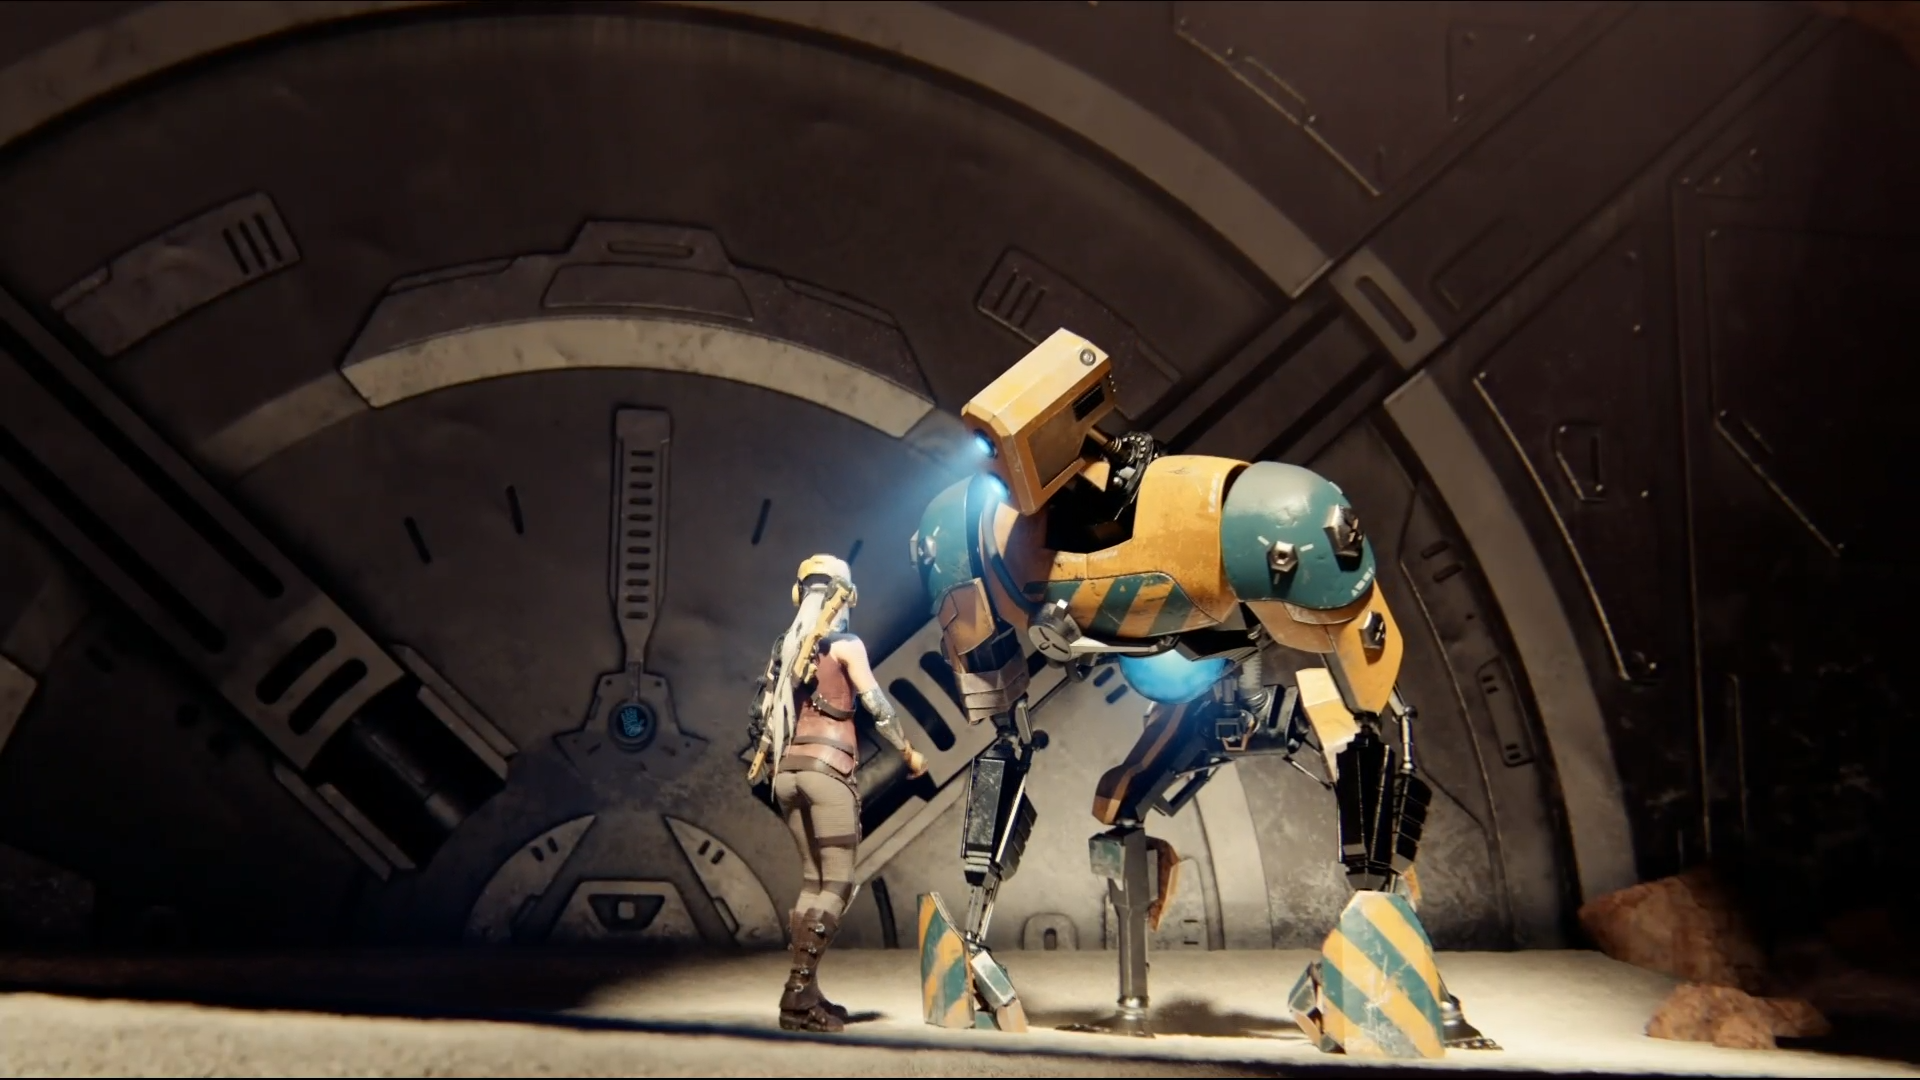 ReCore HD Wallpaper. Cool desktop background, Xbox one, Cool